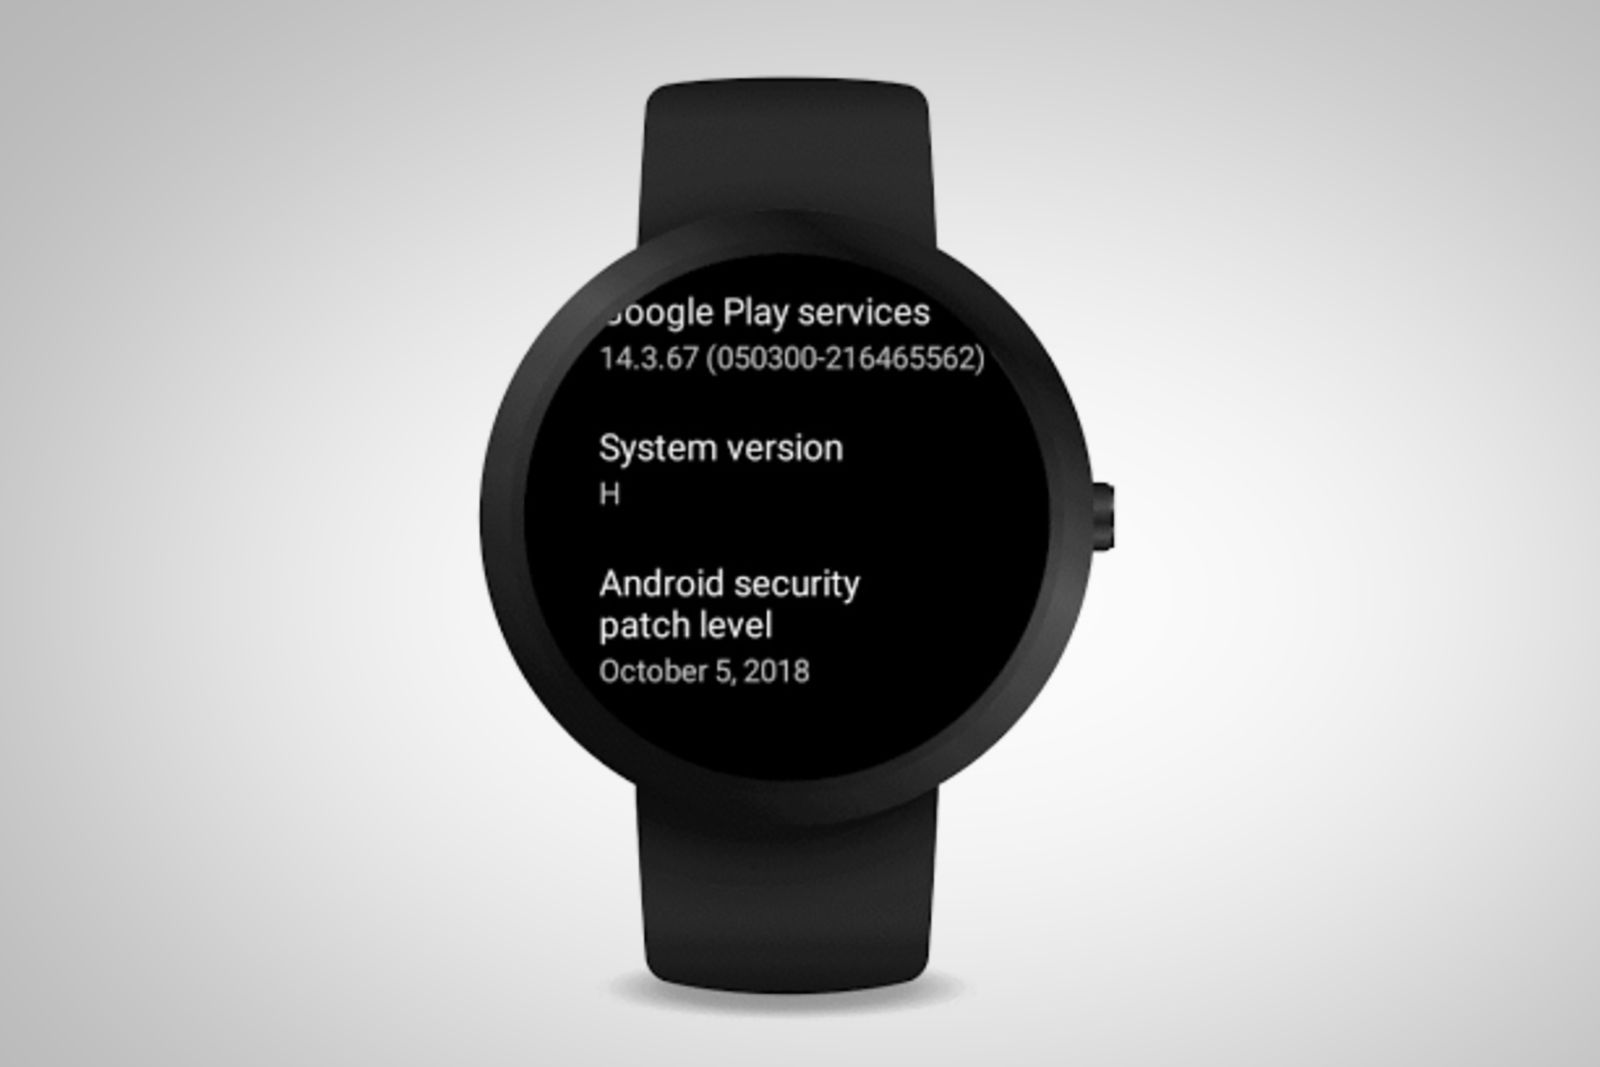 Google rolls out H update to Wear OS - heres whats new image 1